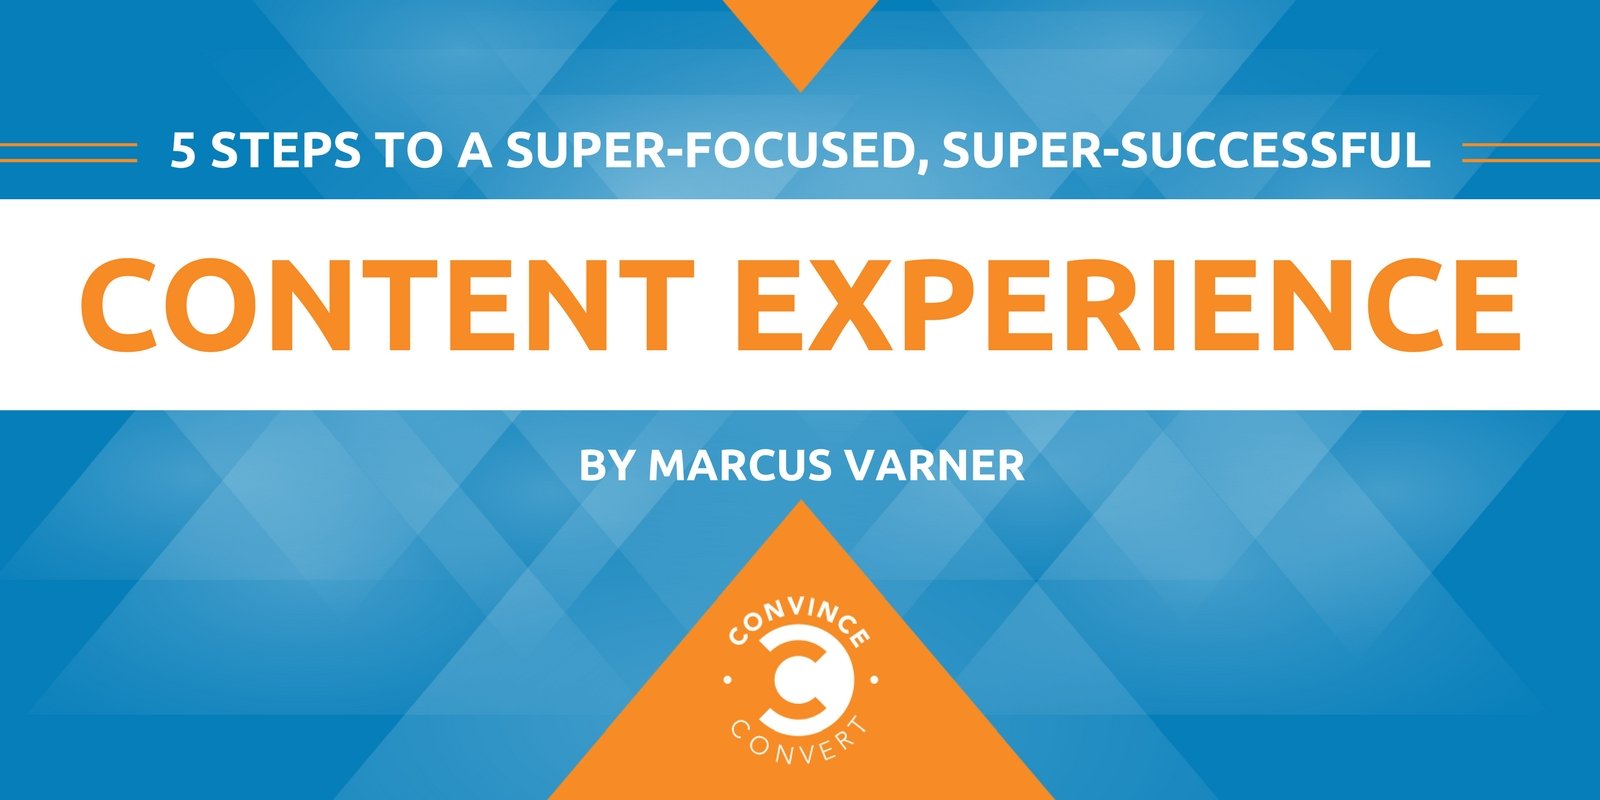 5 Steps to a Super-Focused, Super-Successful Content Experience